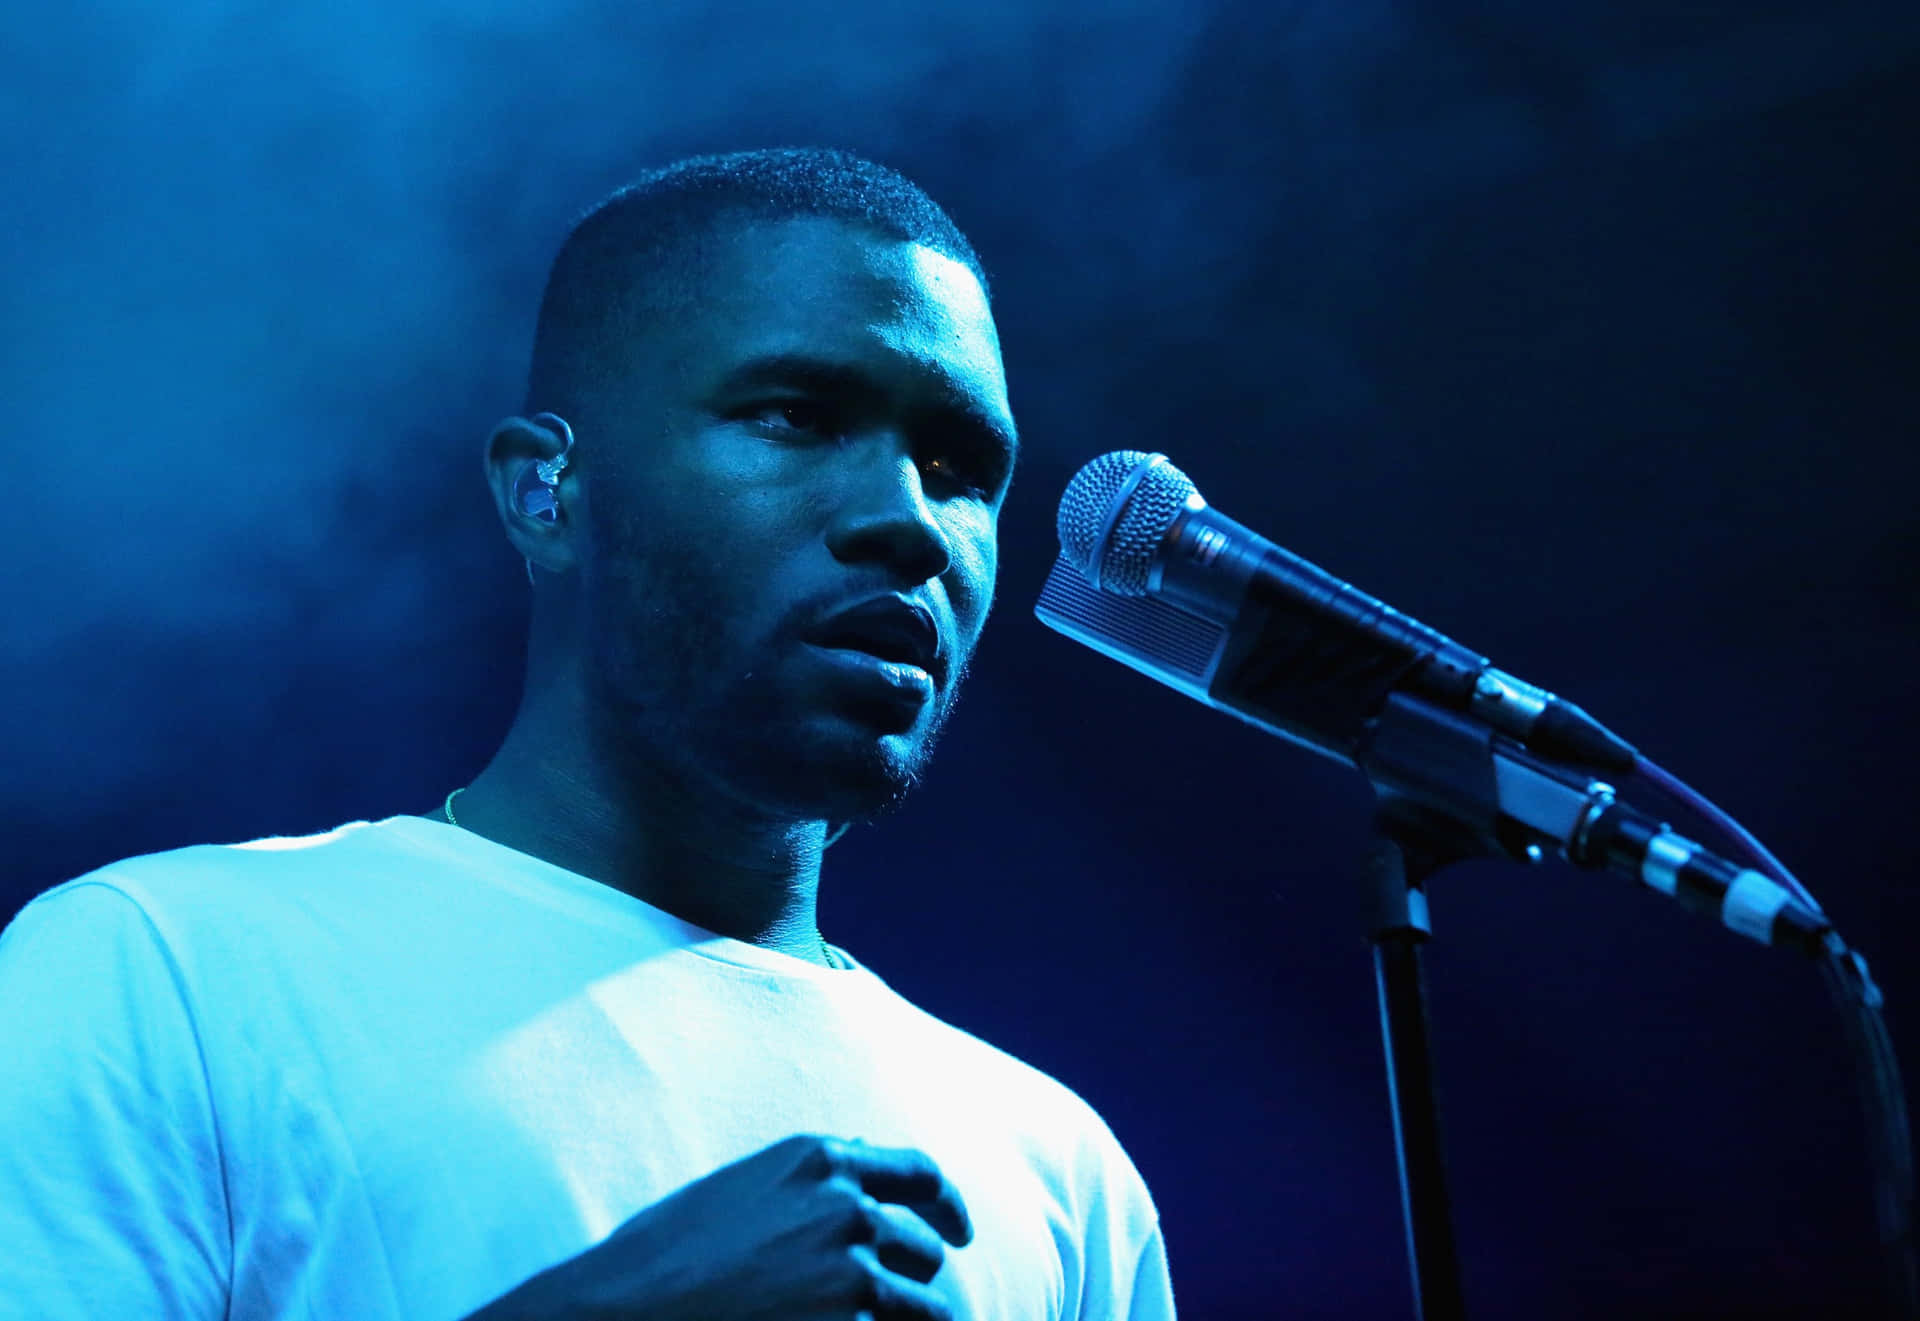 Frank Ocean surrounded by his beloved laptop and books. Wallpaper